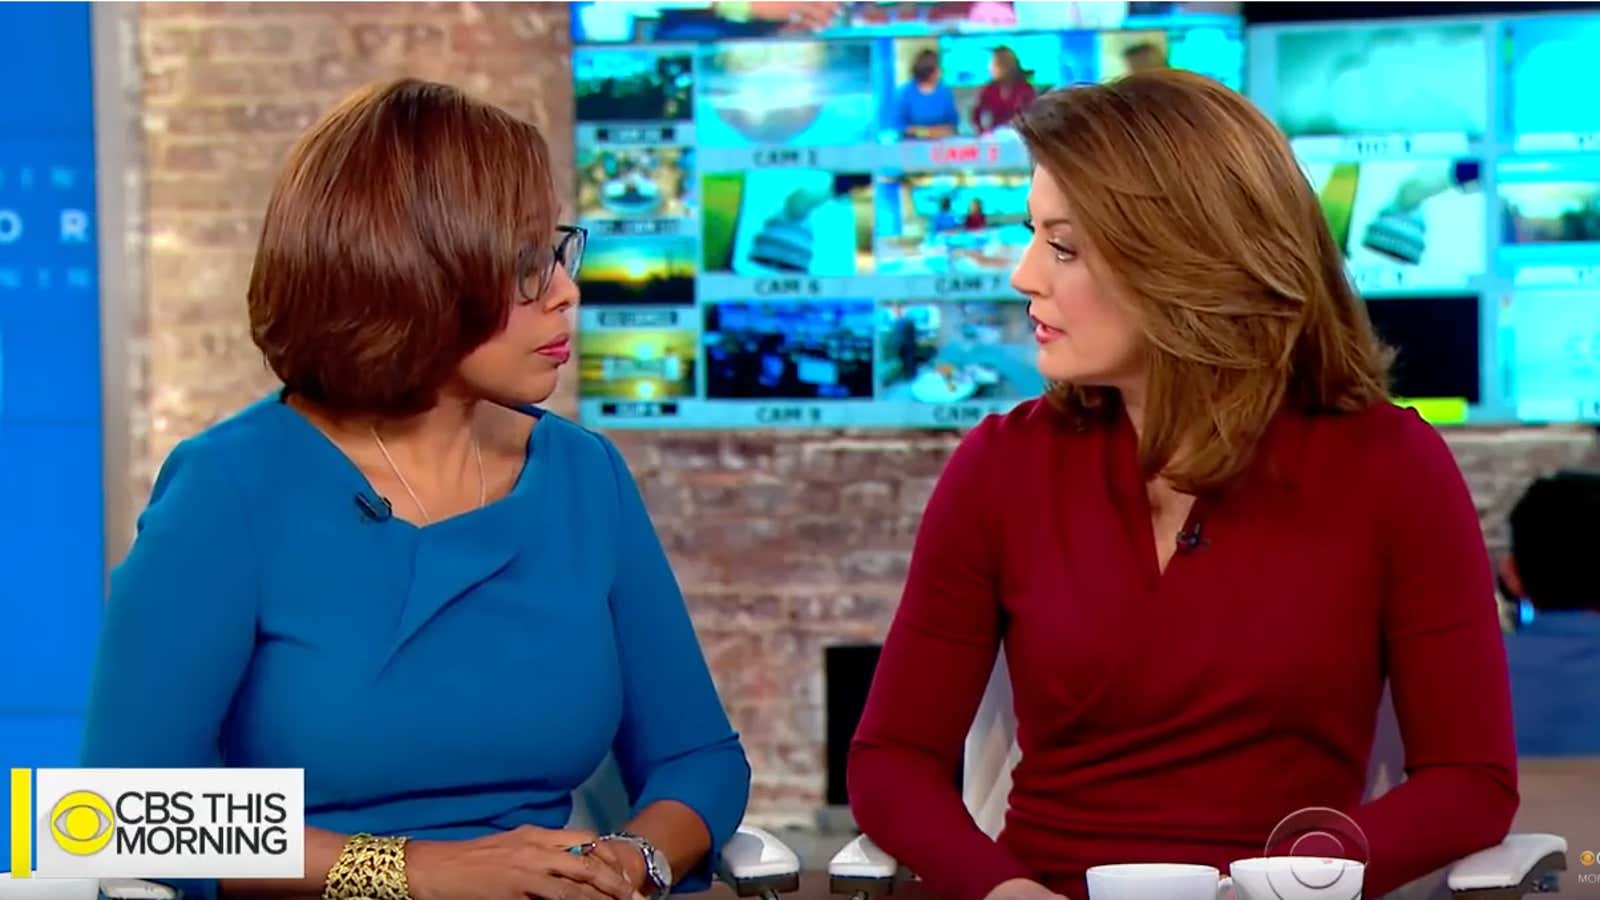 Charlie Rose “does not get a pass here”: Gayle King confronts the truth about a CBS colleague and friend